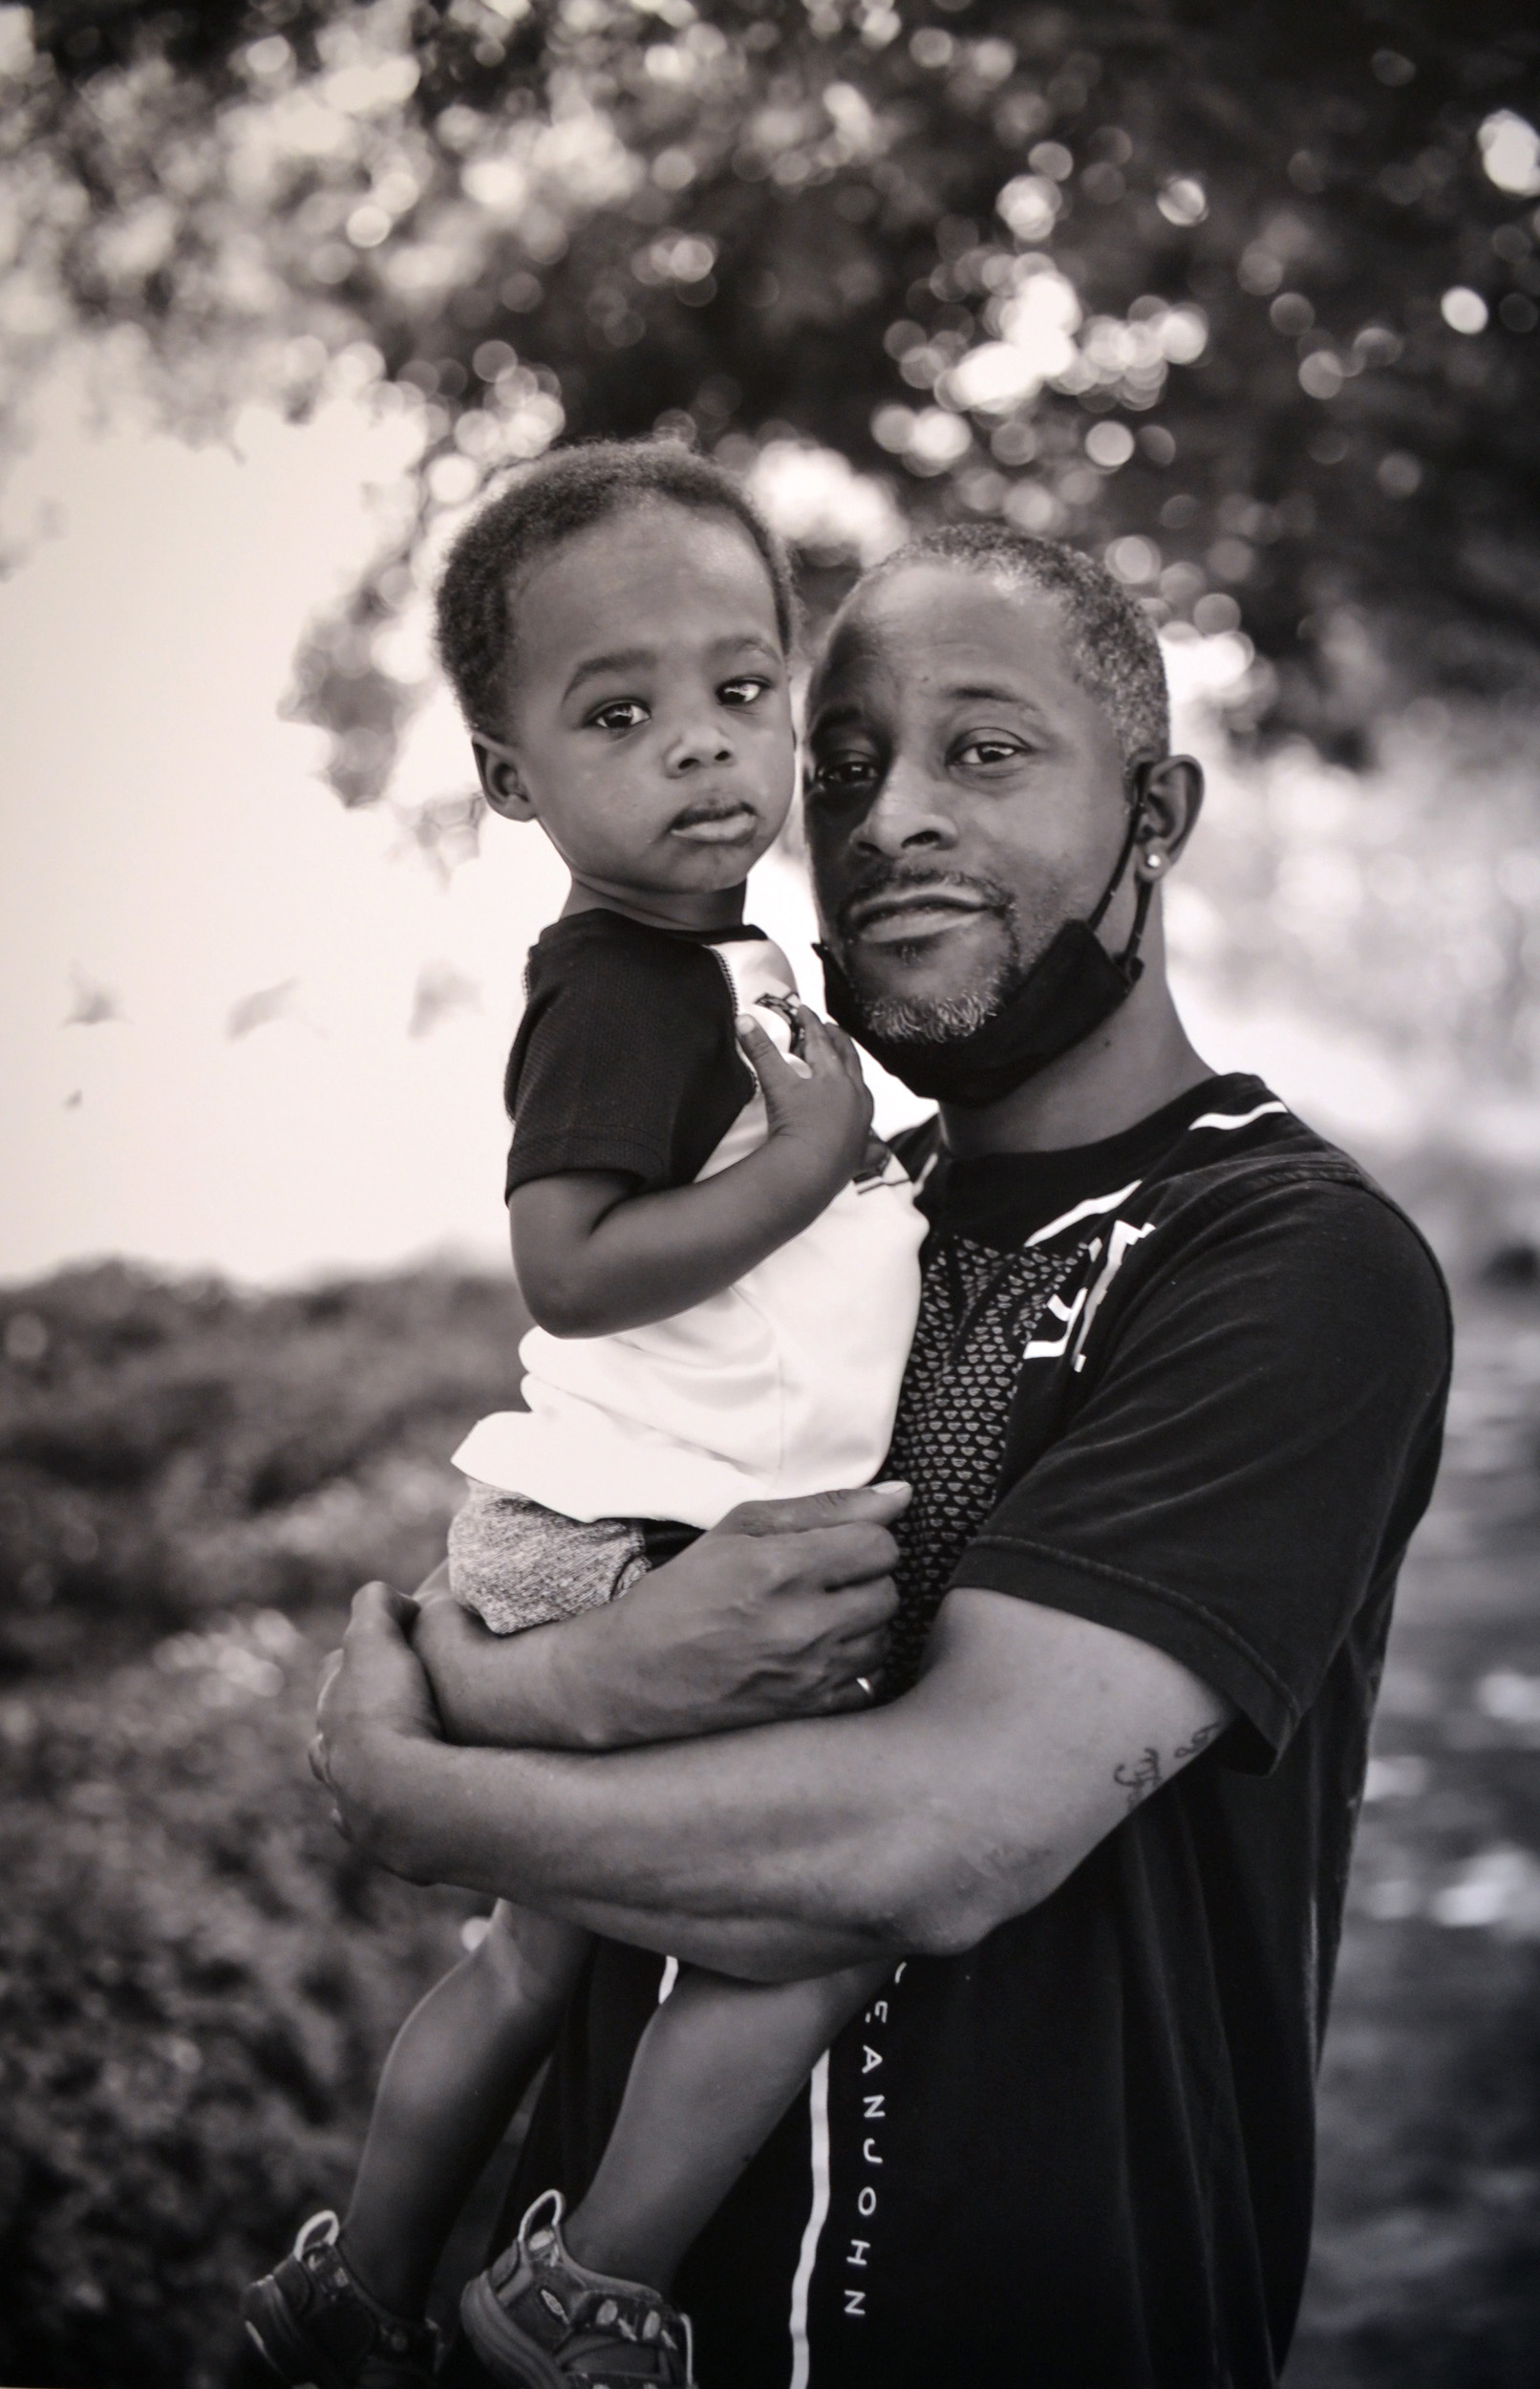 Selected photo from "Dear Black Son" project by Celestia Morgan, Just Injust 2021, Black and White Photograph of black male father embracing young black son